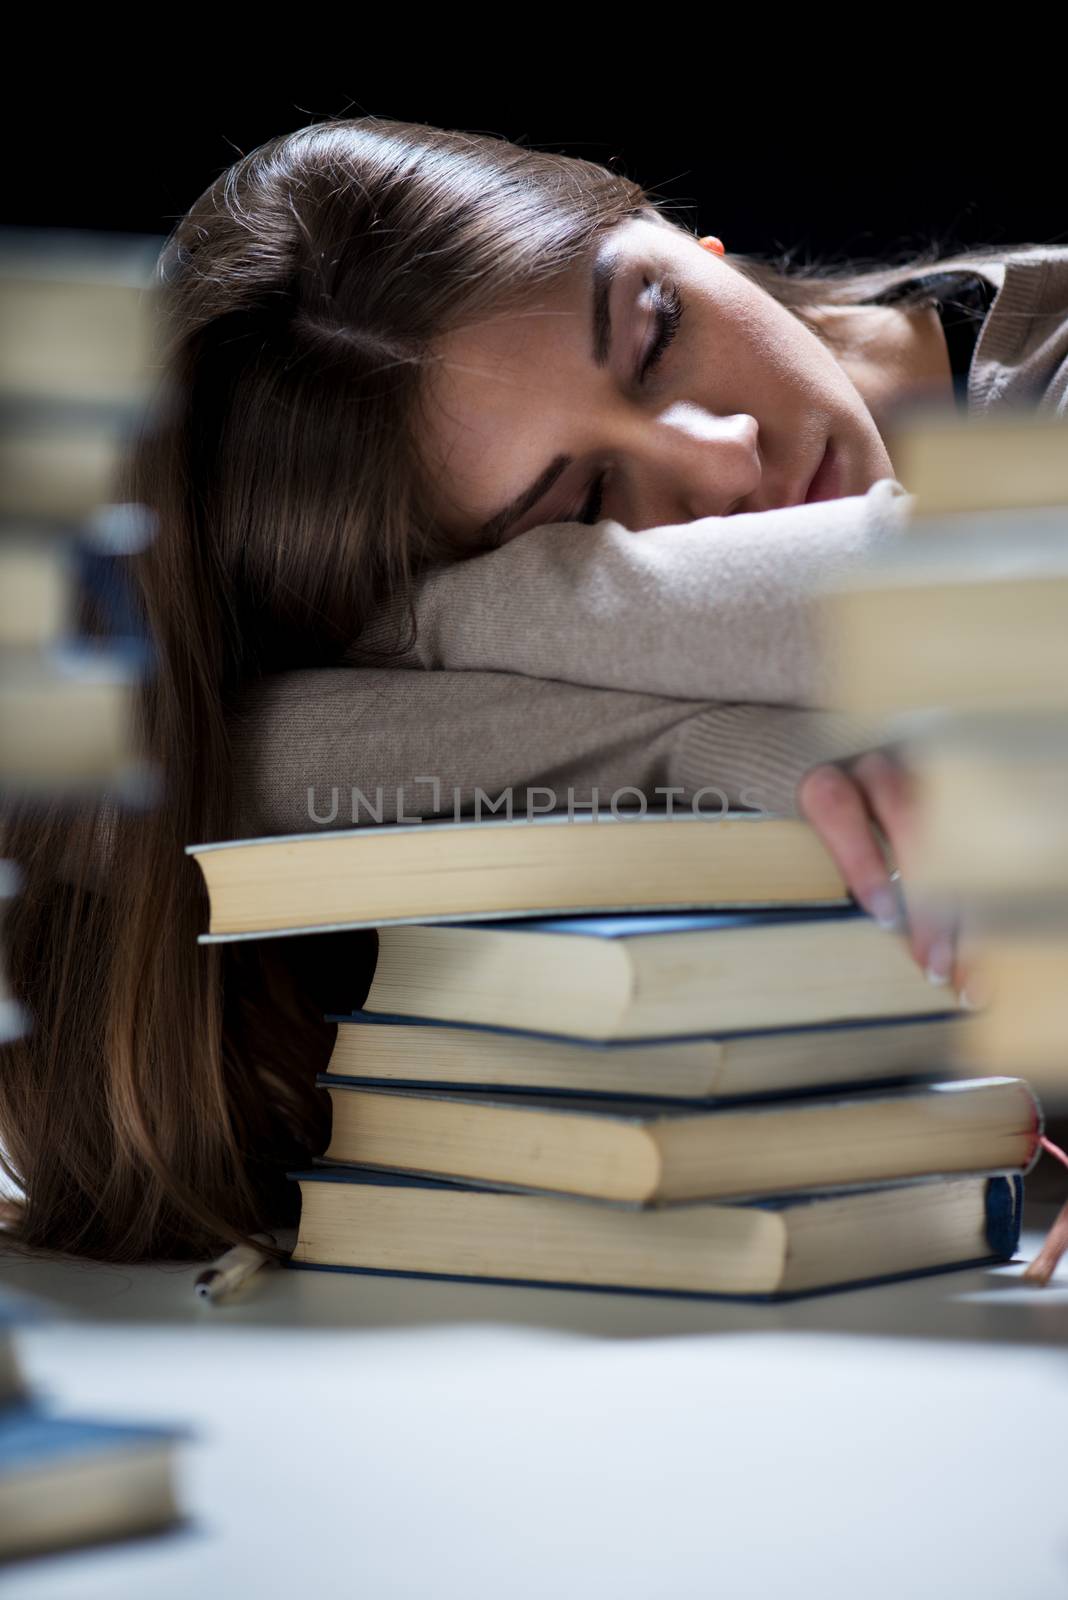 Sleeping Student by MilanMarkovic78